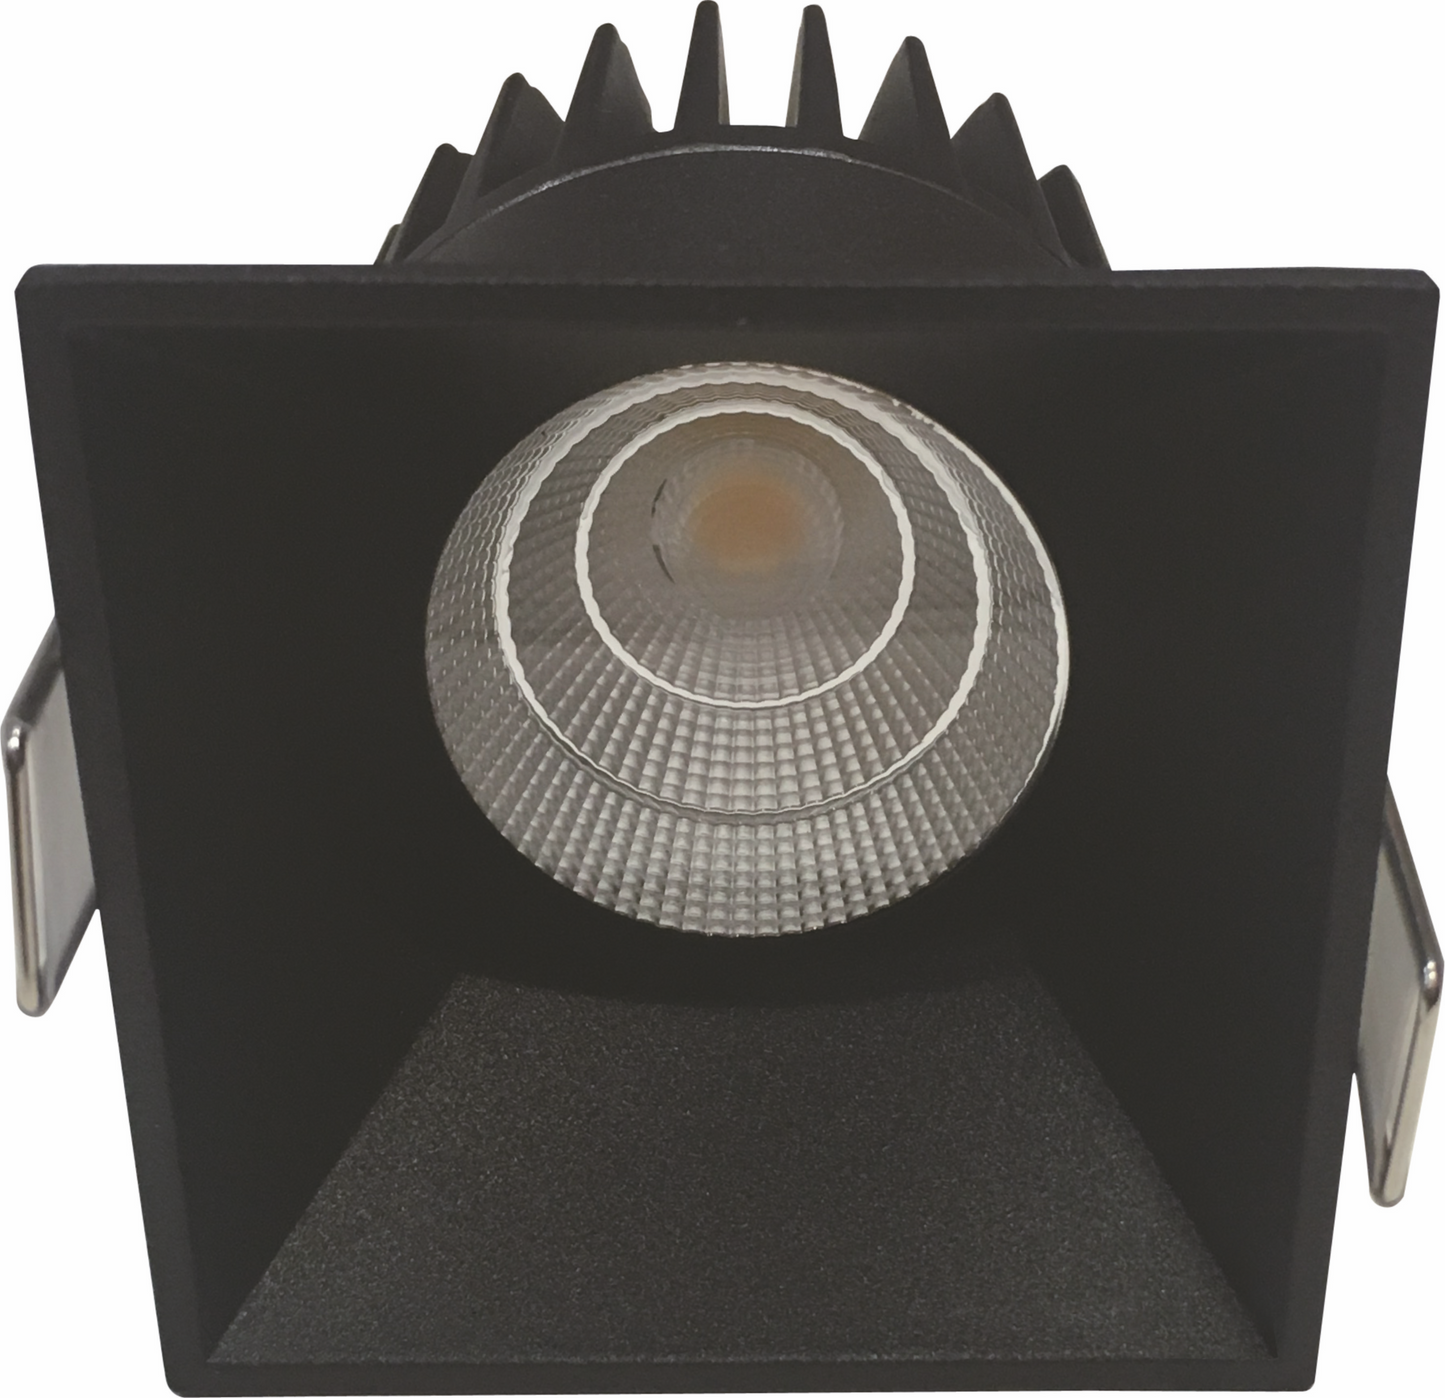 Load image into Gallery viewer, LED Square Spot Light(Trimless) by Ledos (CS 336)
